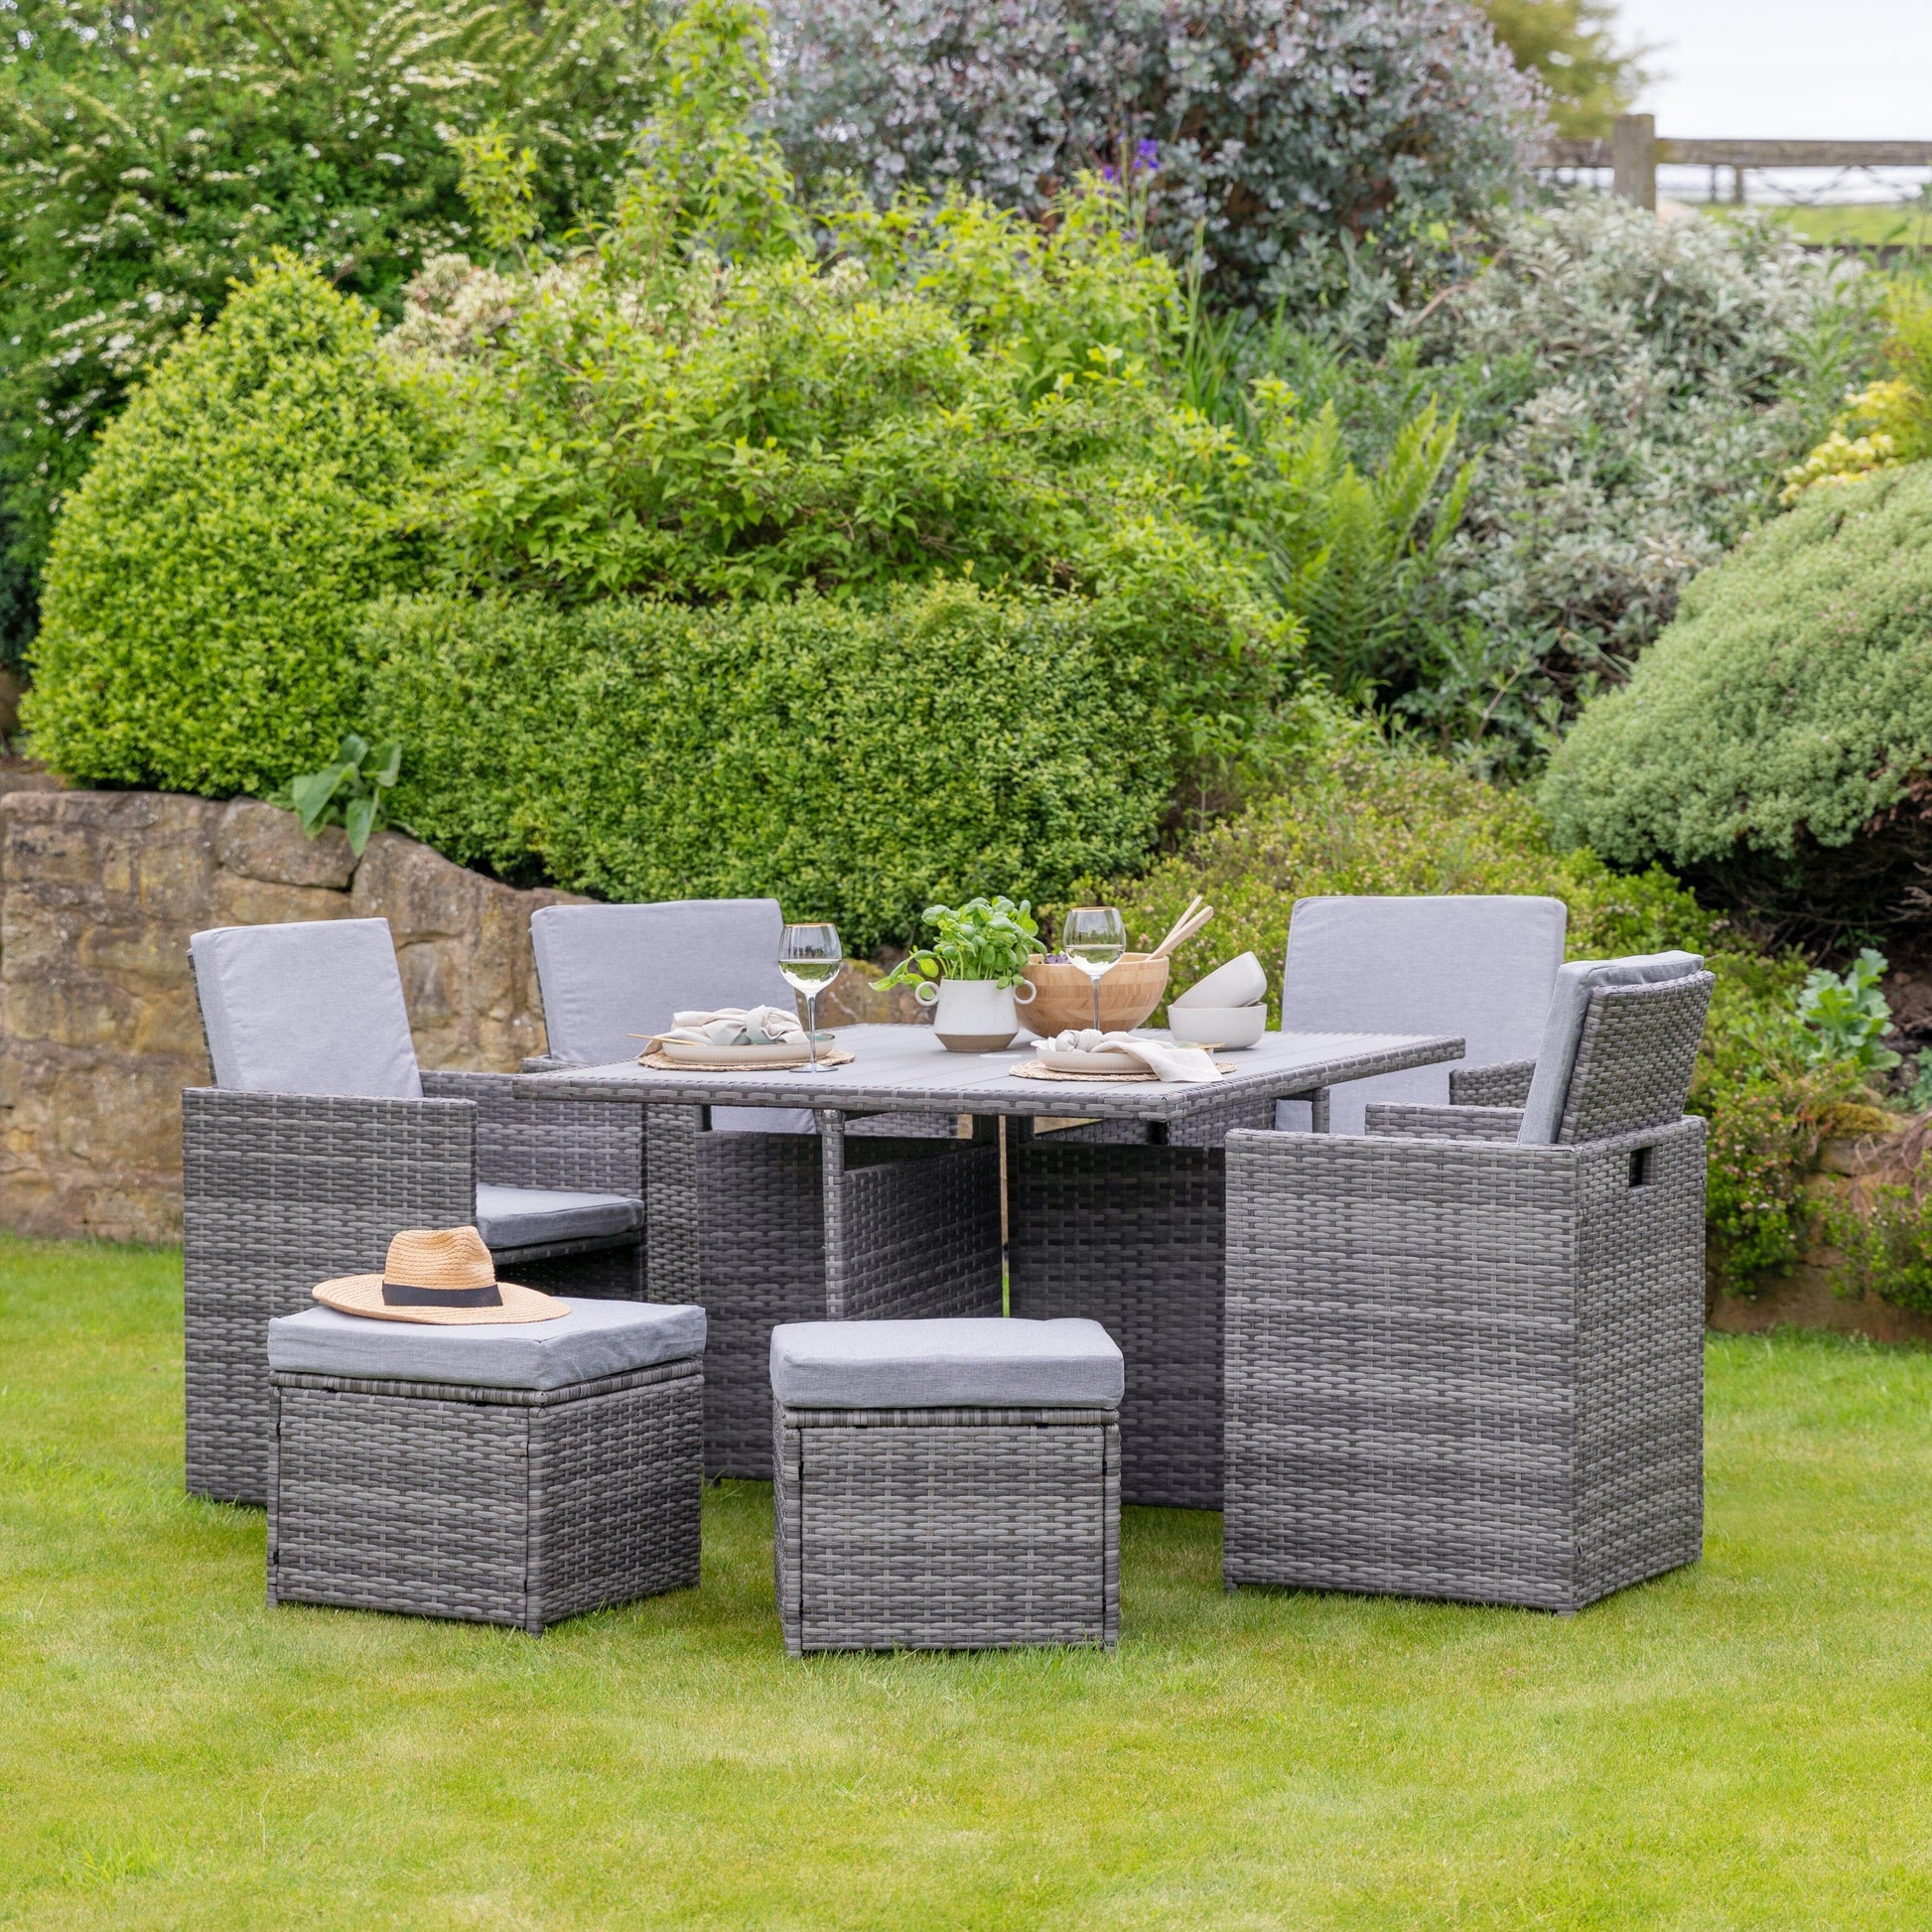 8 Seater Rattan Cube Outdoor Dining Set - Grey Weave Polywood Top